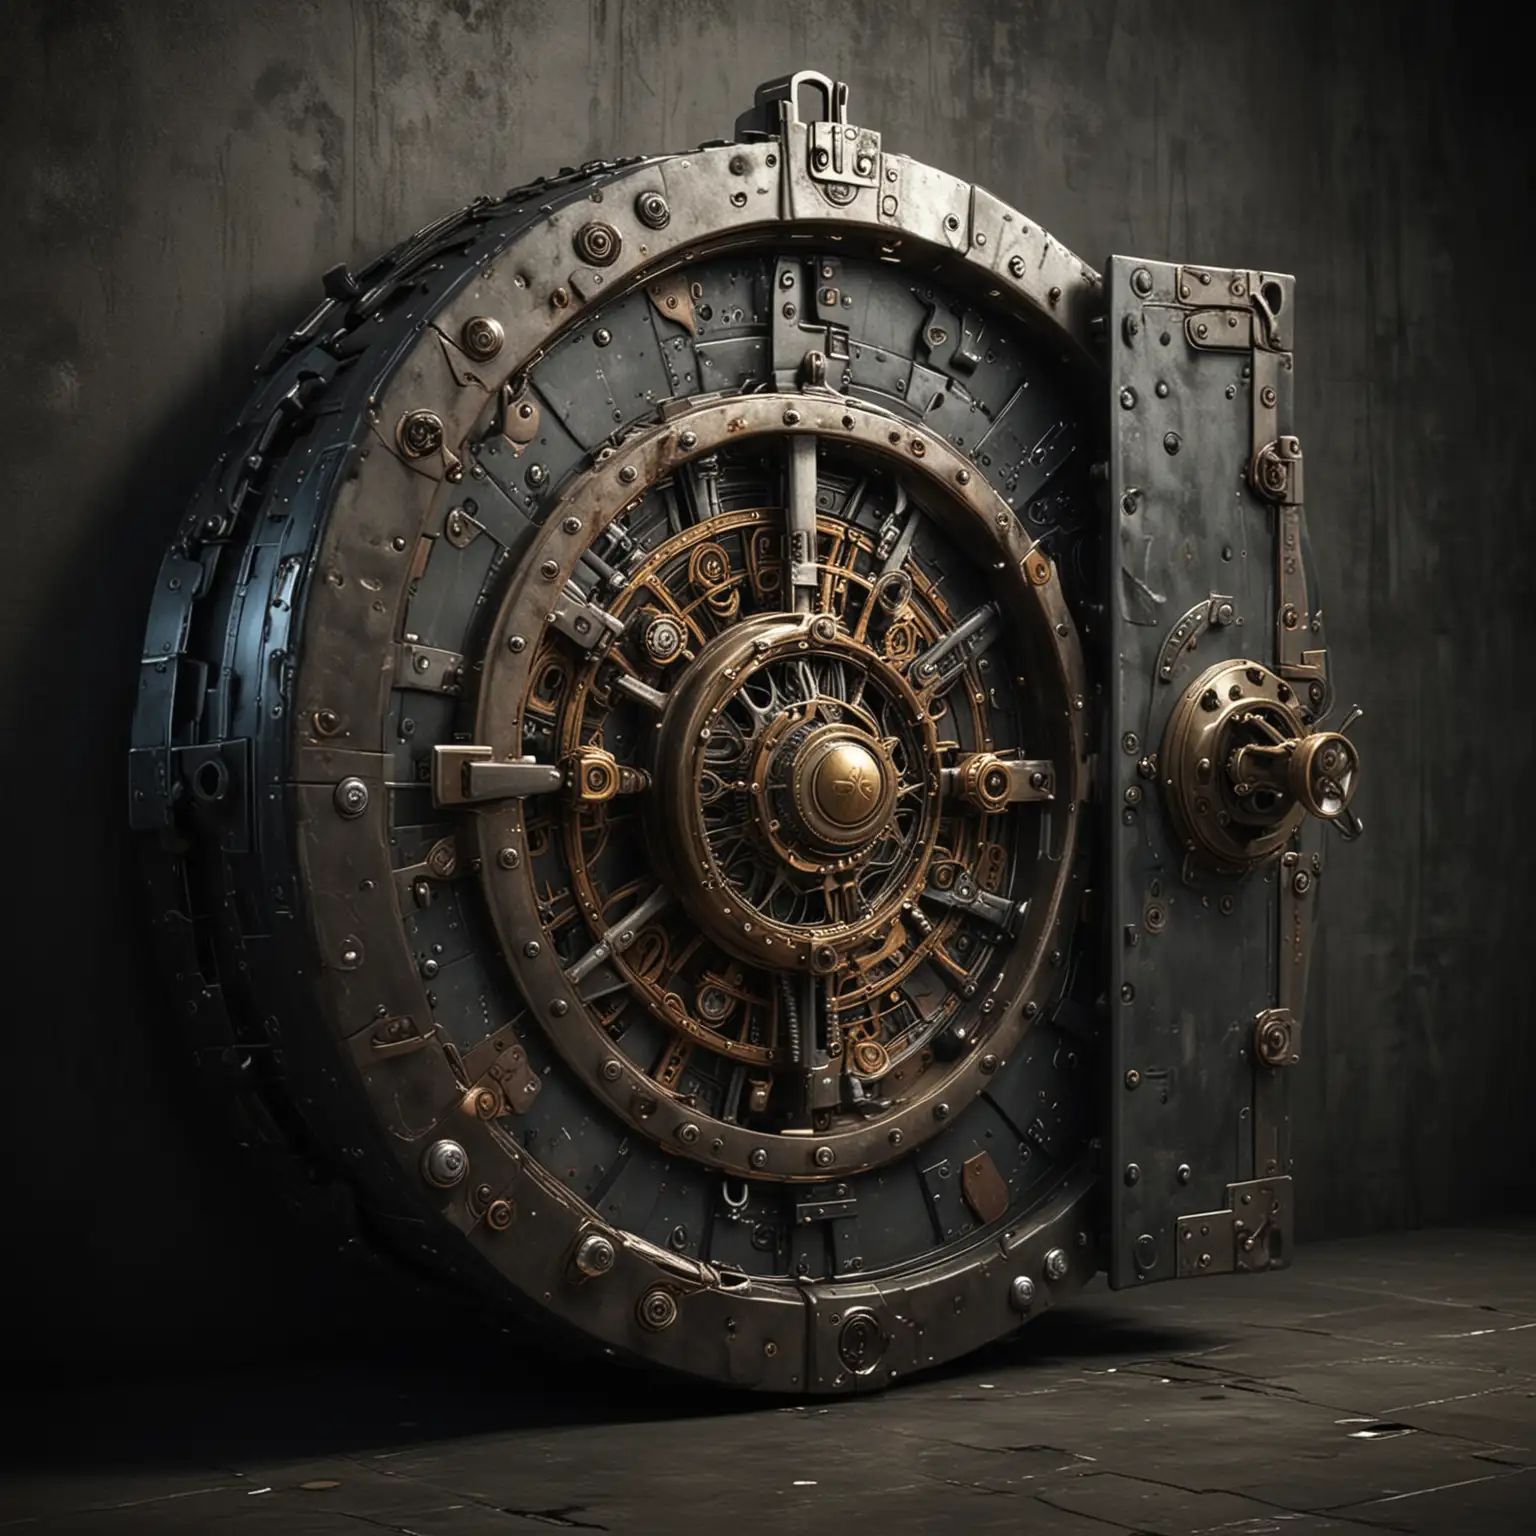 I need an image for a 3d vault with digital access key,  something modern, cool looking and slick
Make sure the color scheme is dark and edgy
Add some futuristic elements to it
with steampunk elements added to it